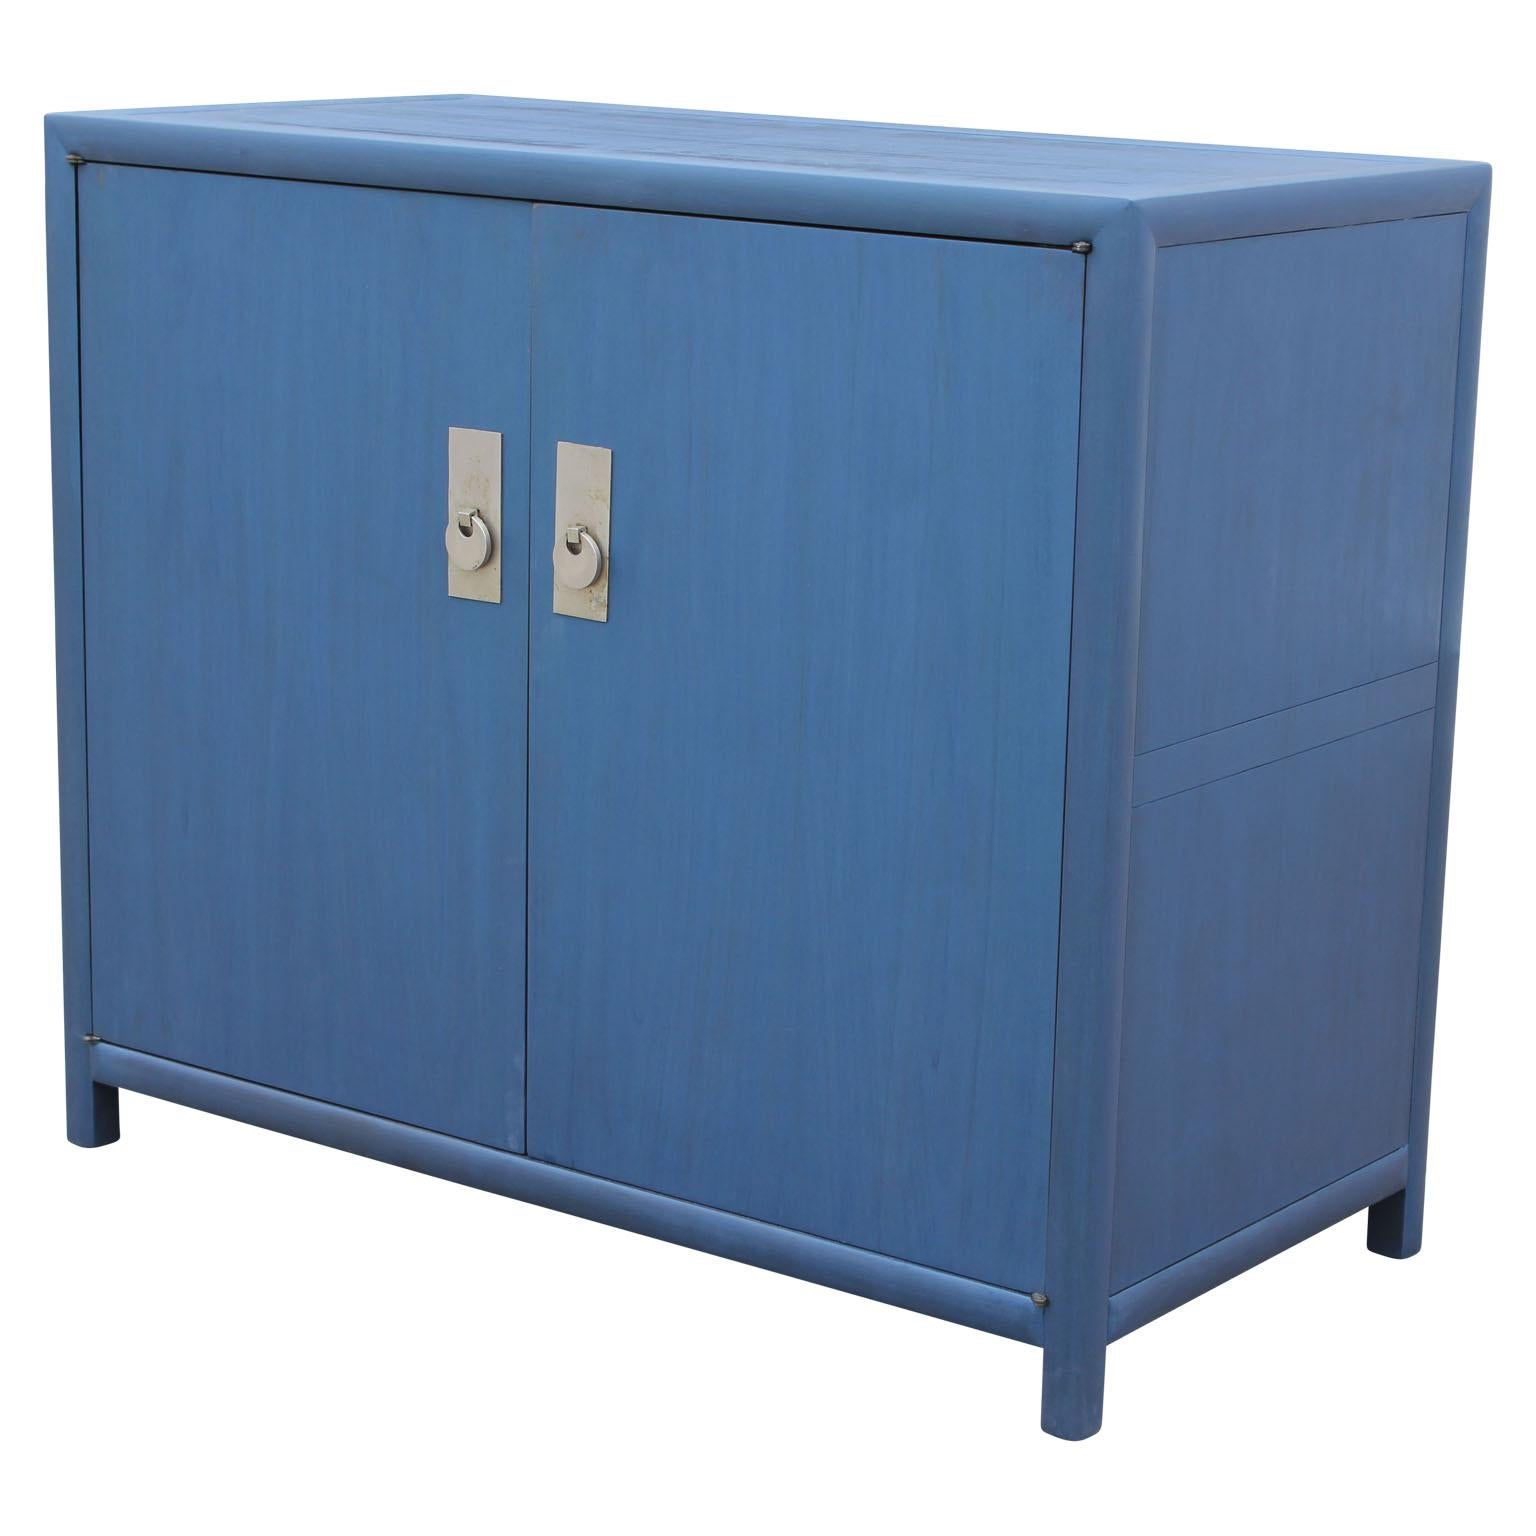 Beautiful cabinet by Michael Taylor for Baker's New World collection. It is in a striking blue. 

This listing is just for the cabinet.